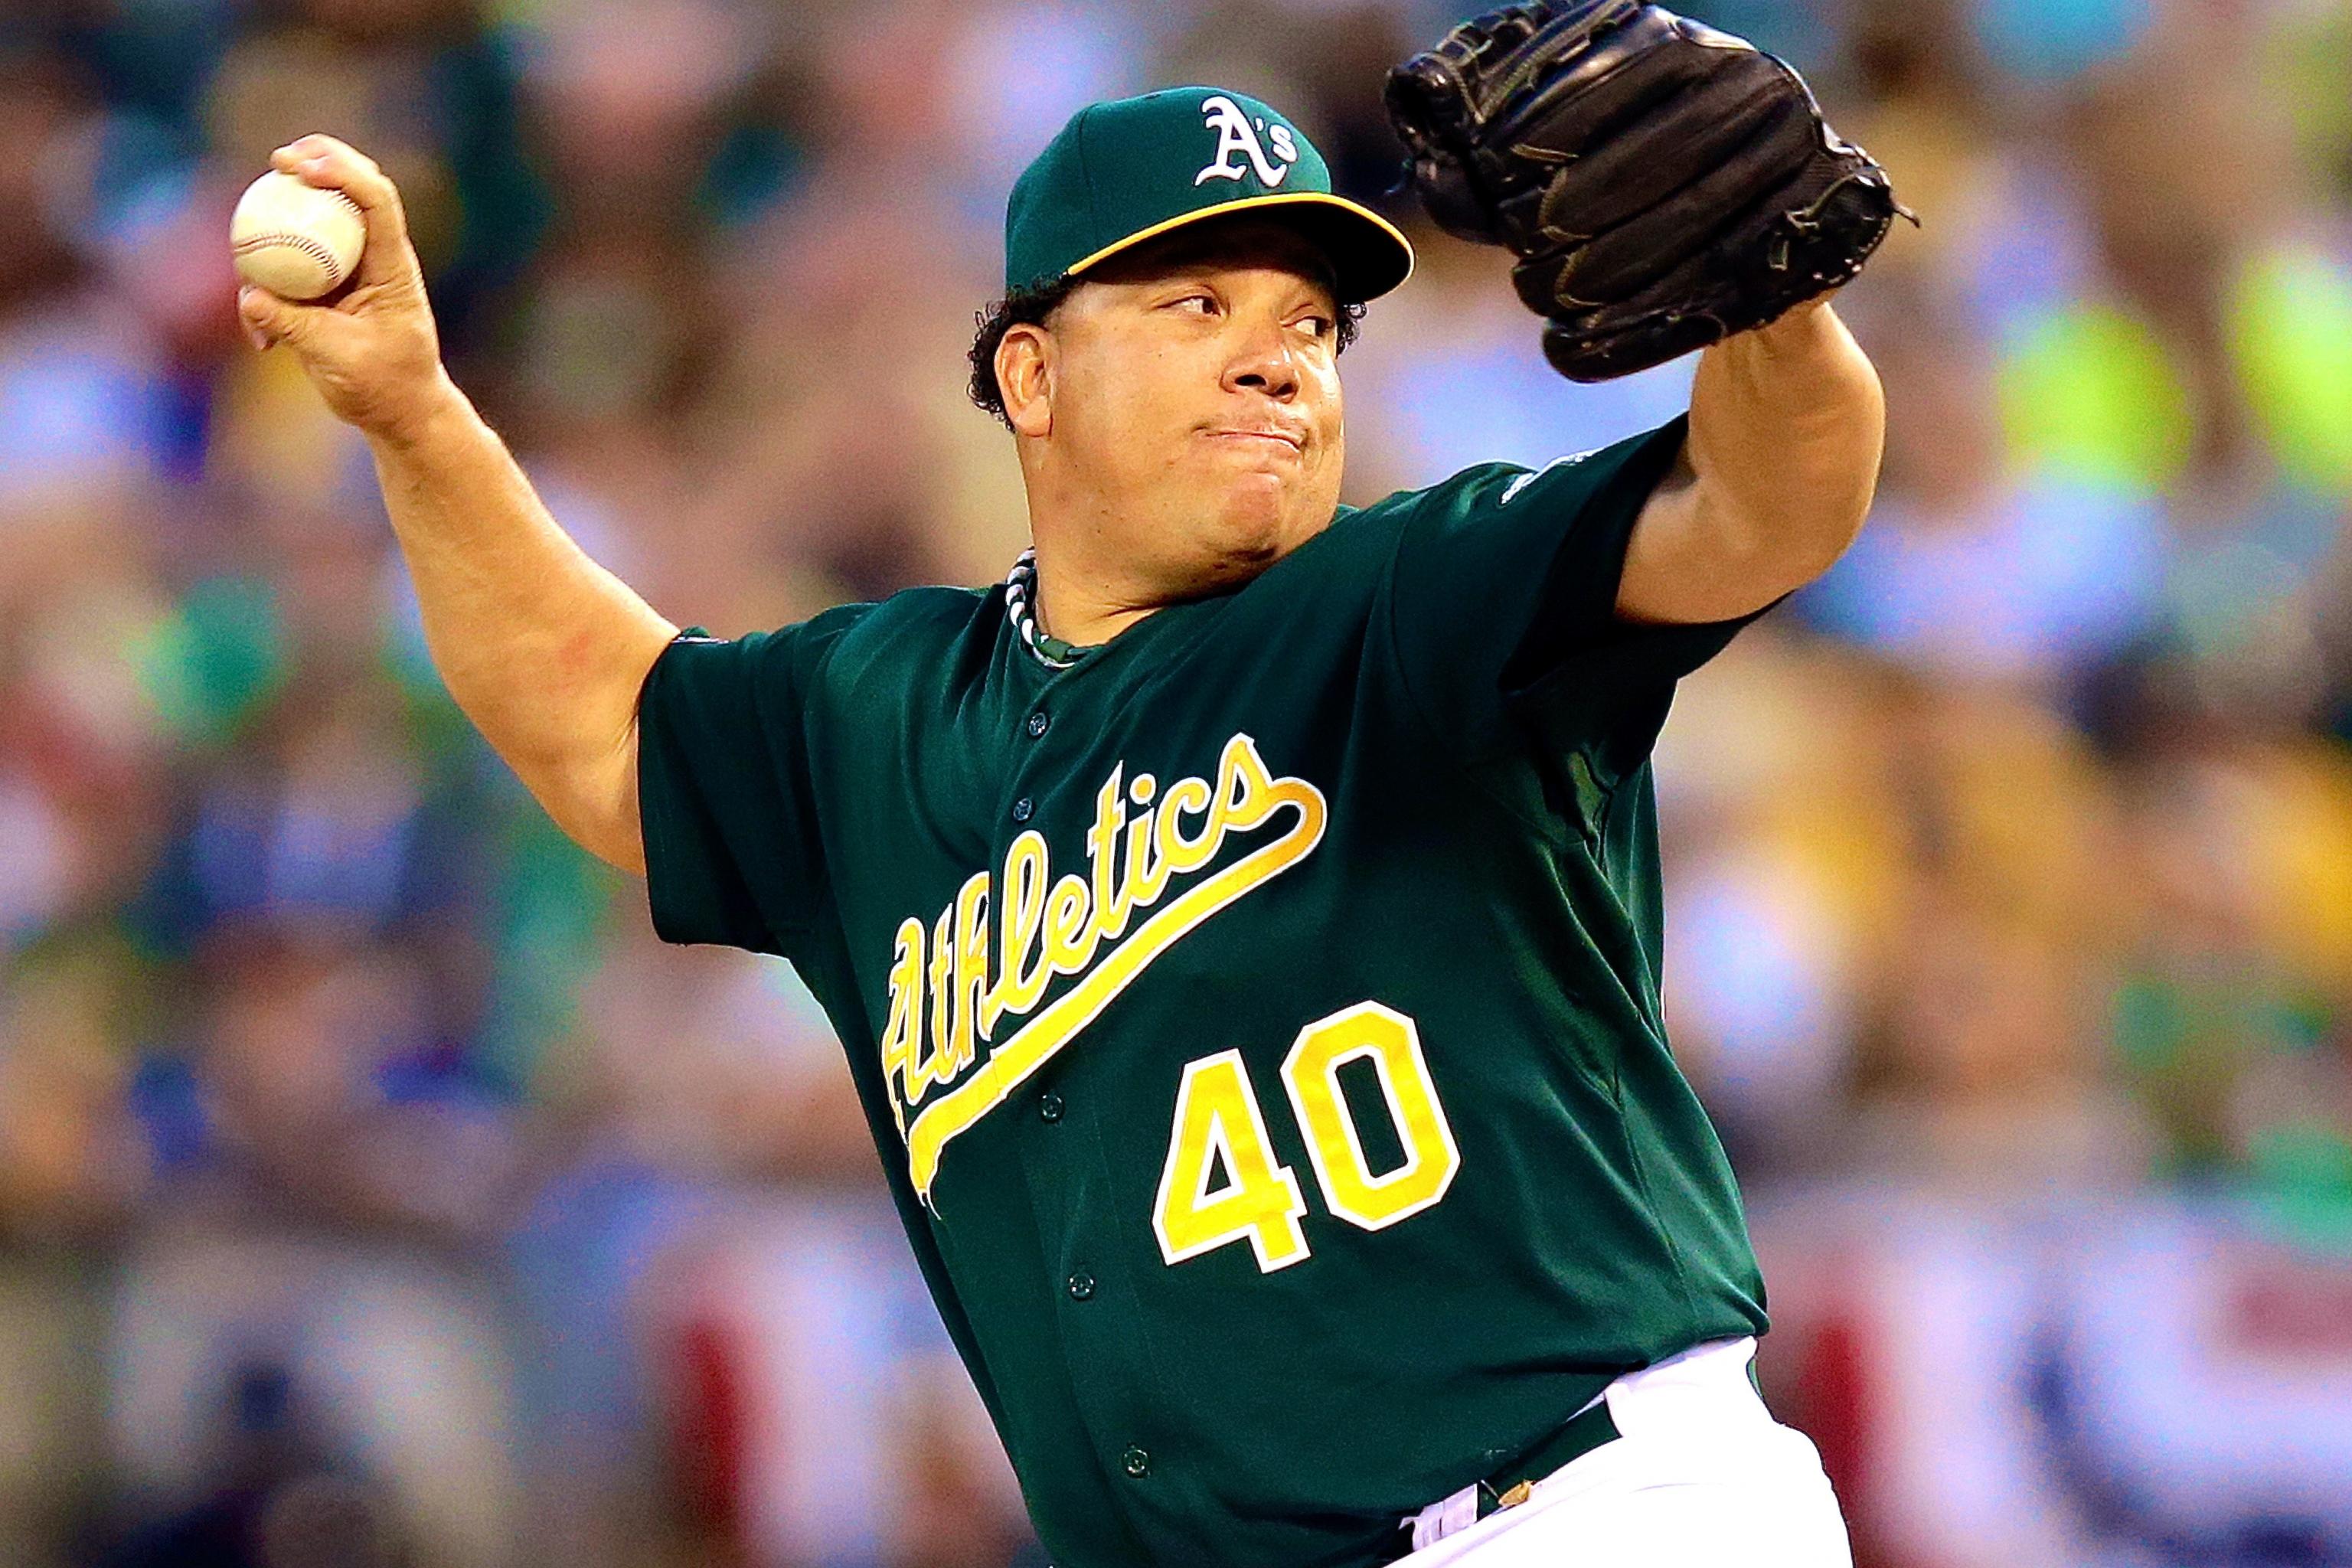 Mets reportedly hosting a Bartolo Colon retirement ceremony in August